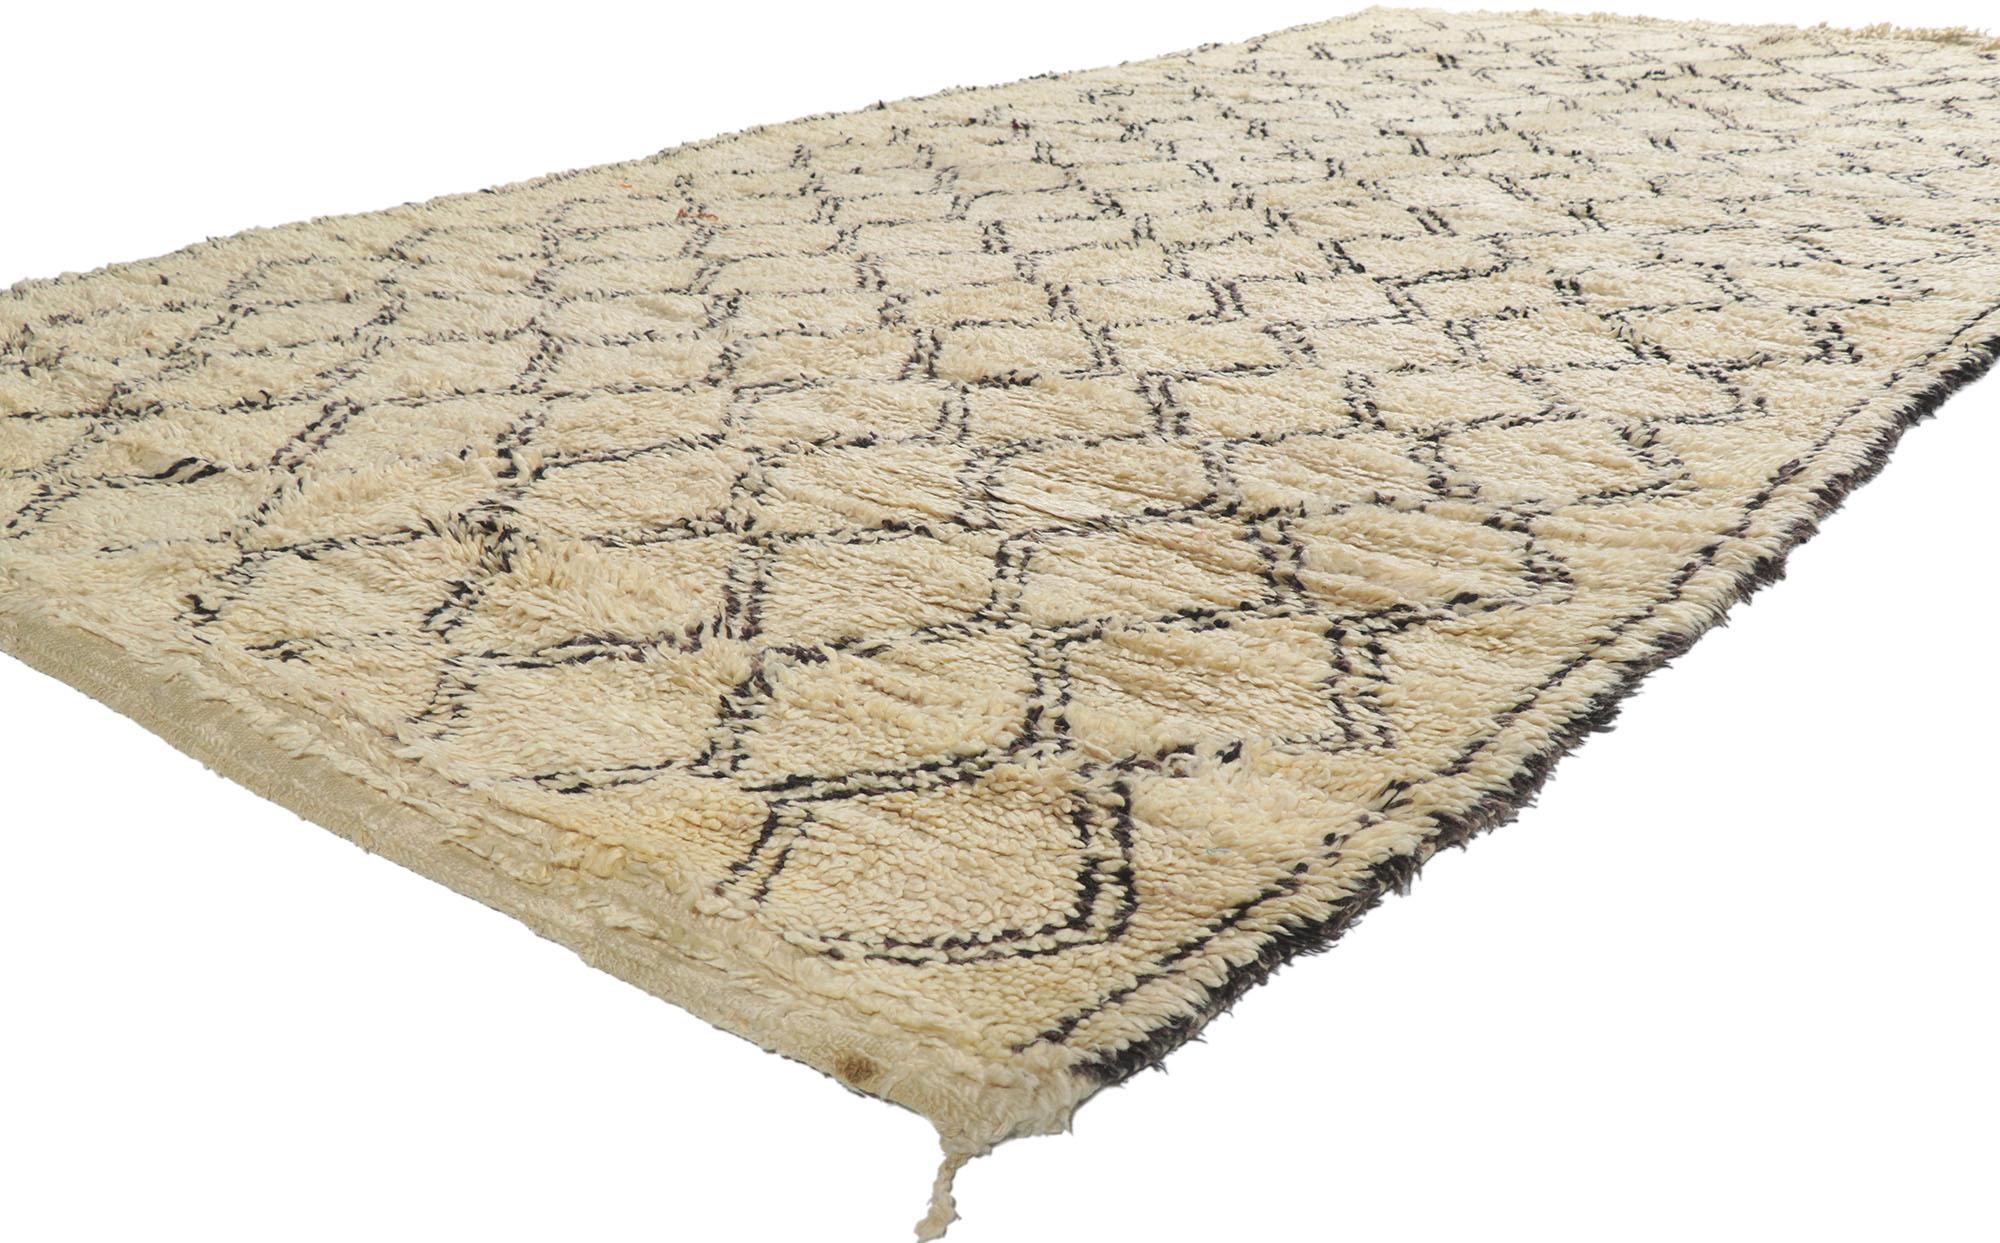 21390 Vintage Berber Moroccan Beni Ourain Rug. With its simplicity, plush pile and tribal style, this hand knotted wool vintage Berber Beni Ourain Moroccan rug is a captivating vision of woven beauty. It features a diamond lattice composed of